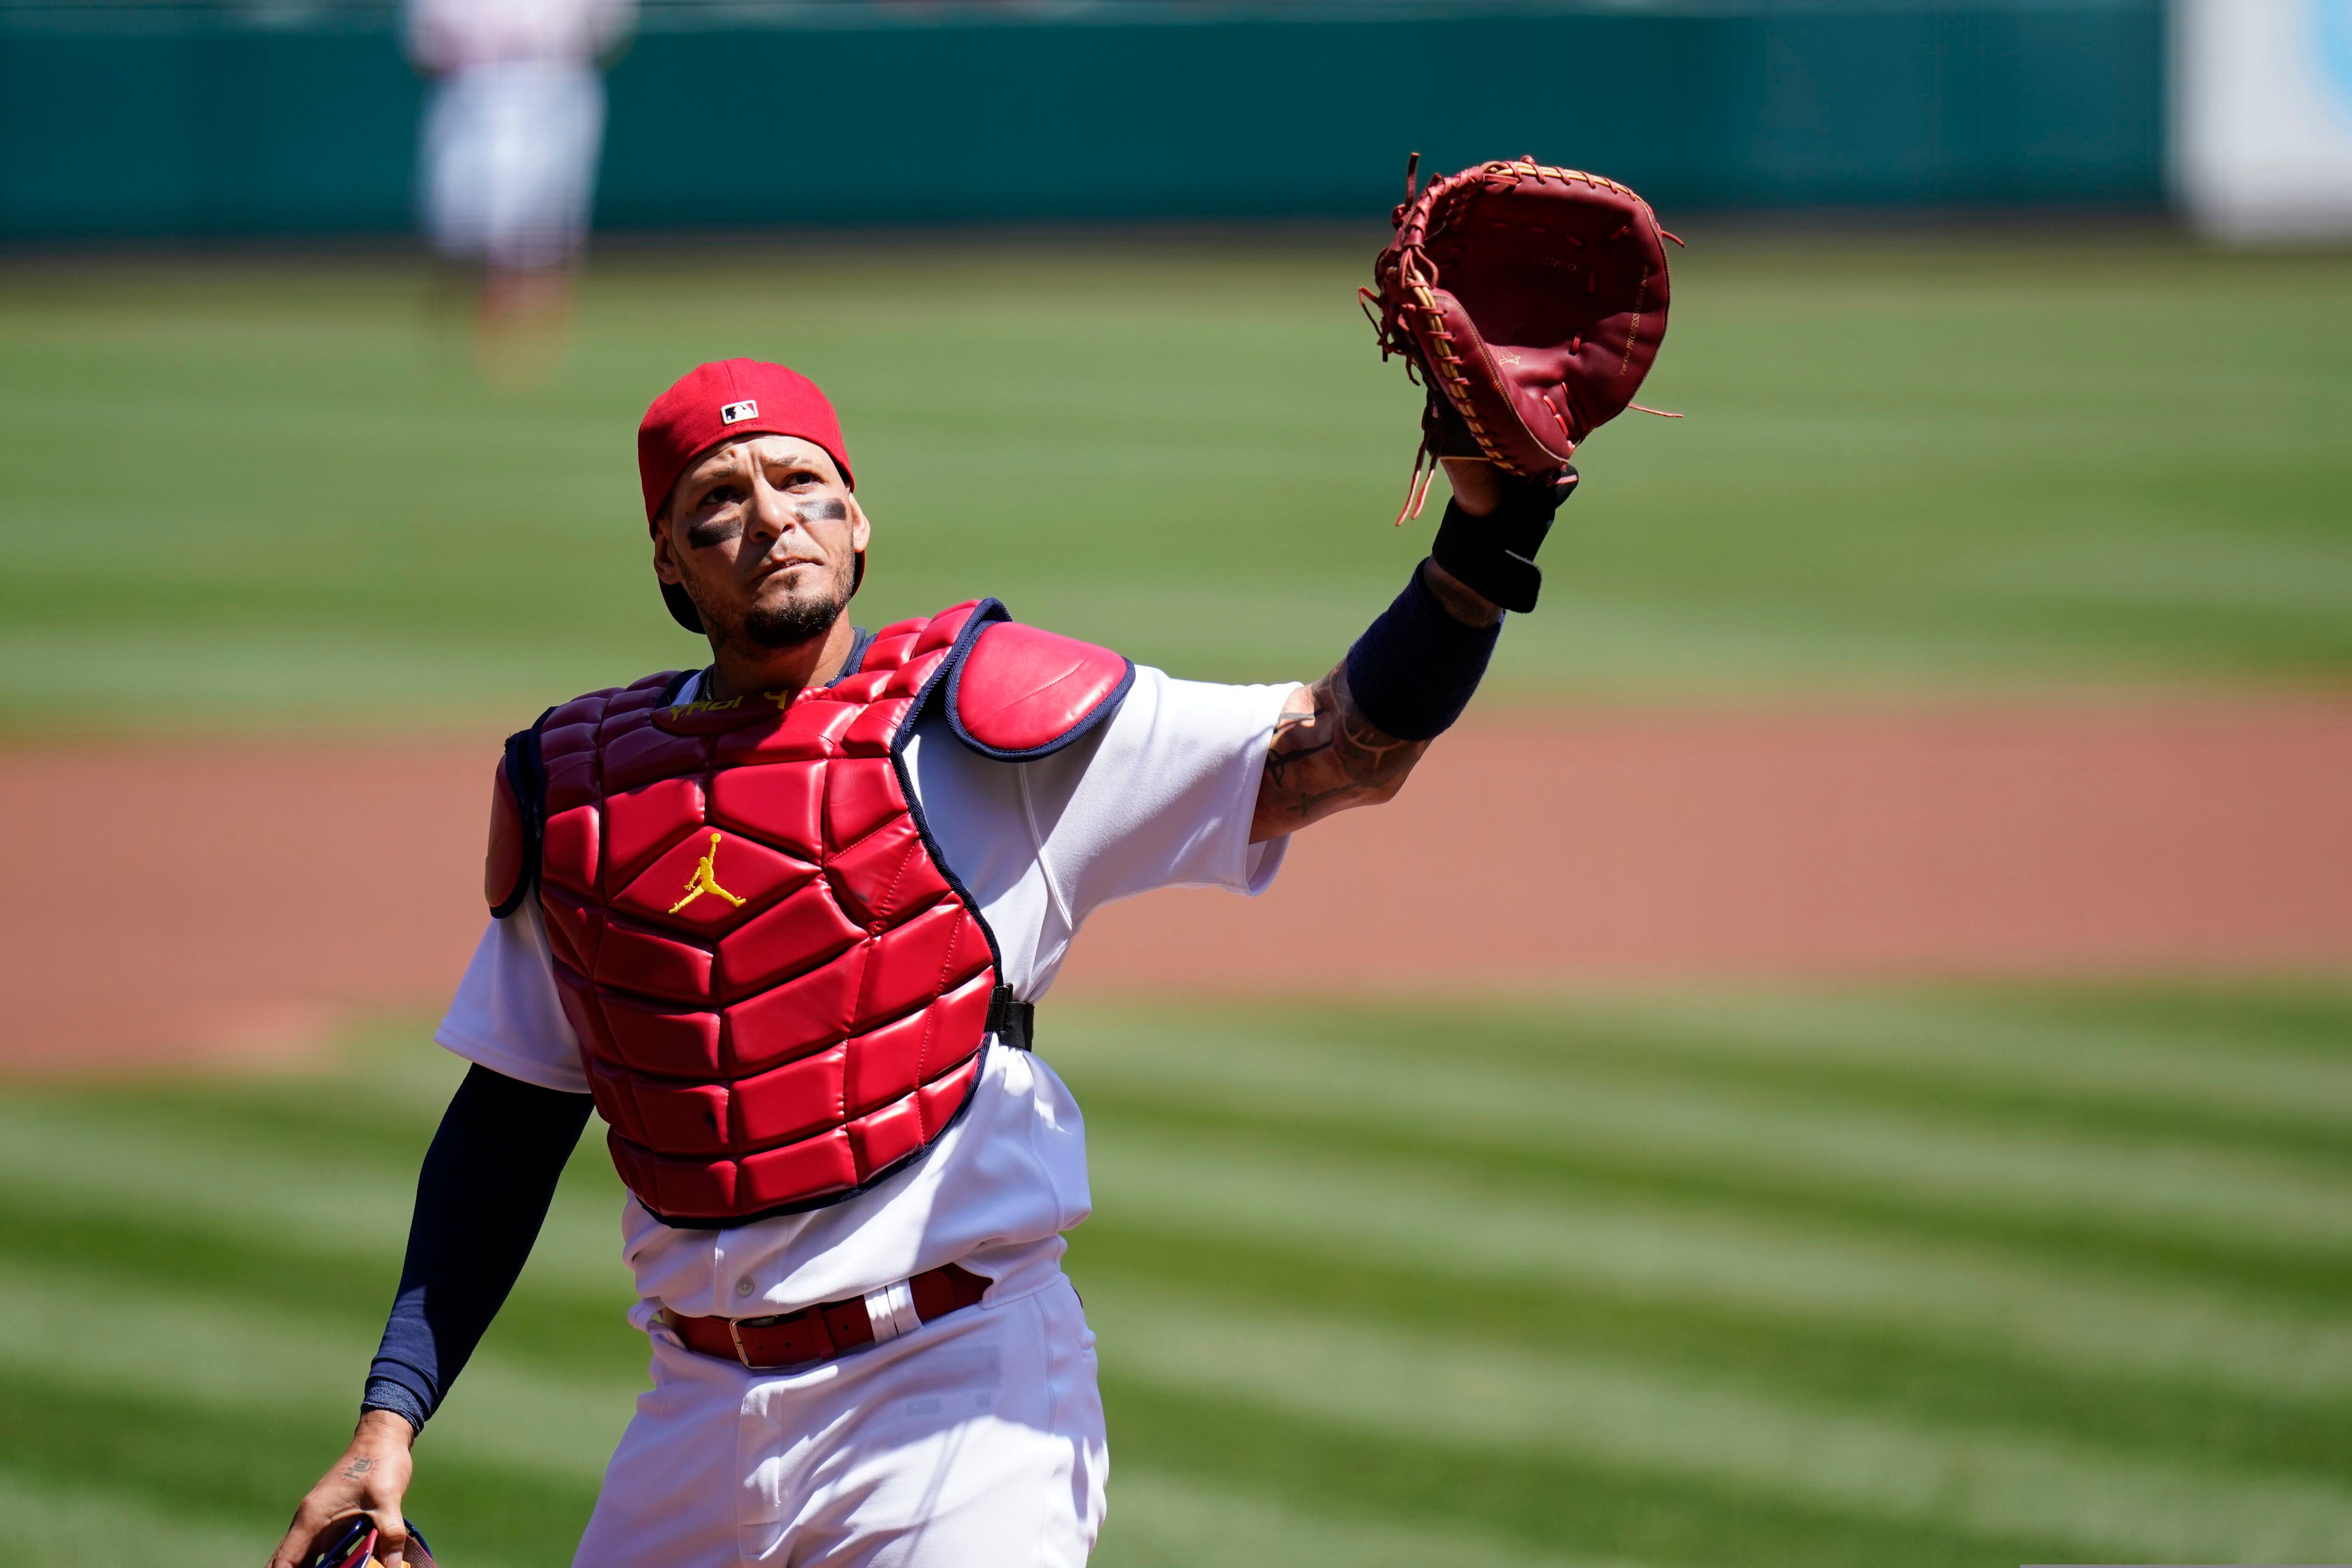 Cards catcher Molina missing 2 games for 'business matters